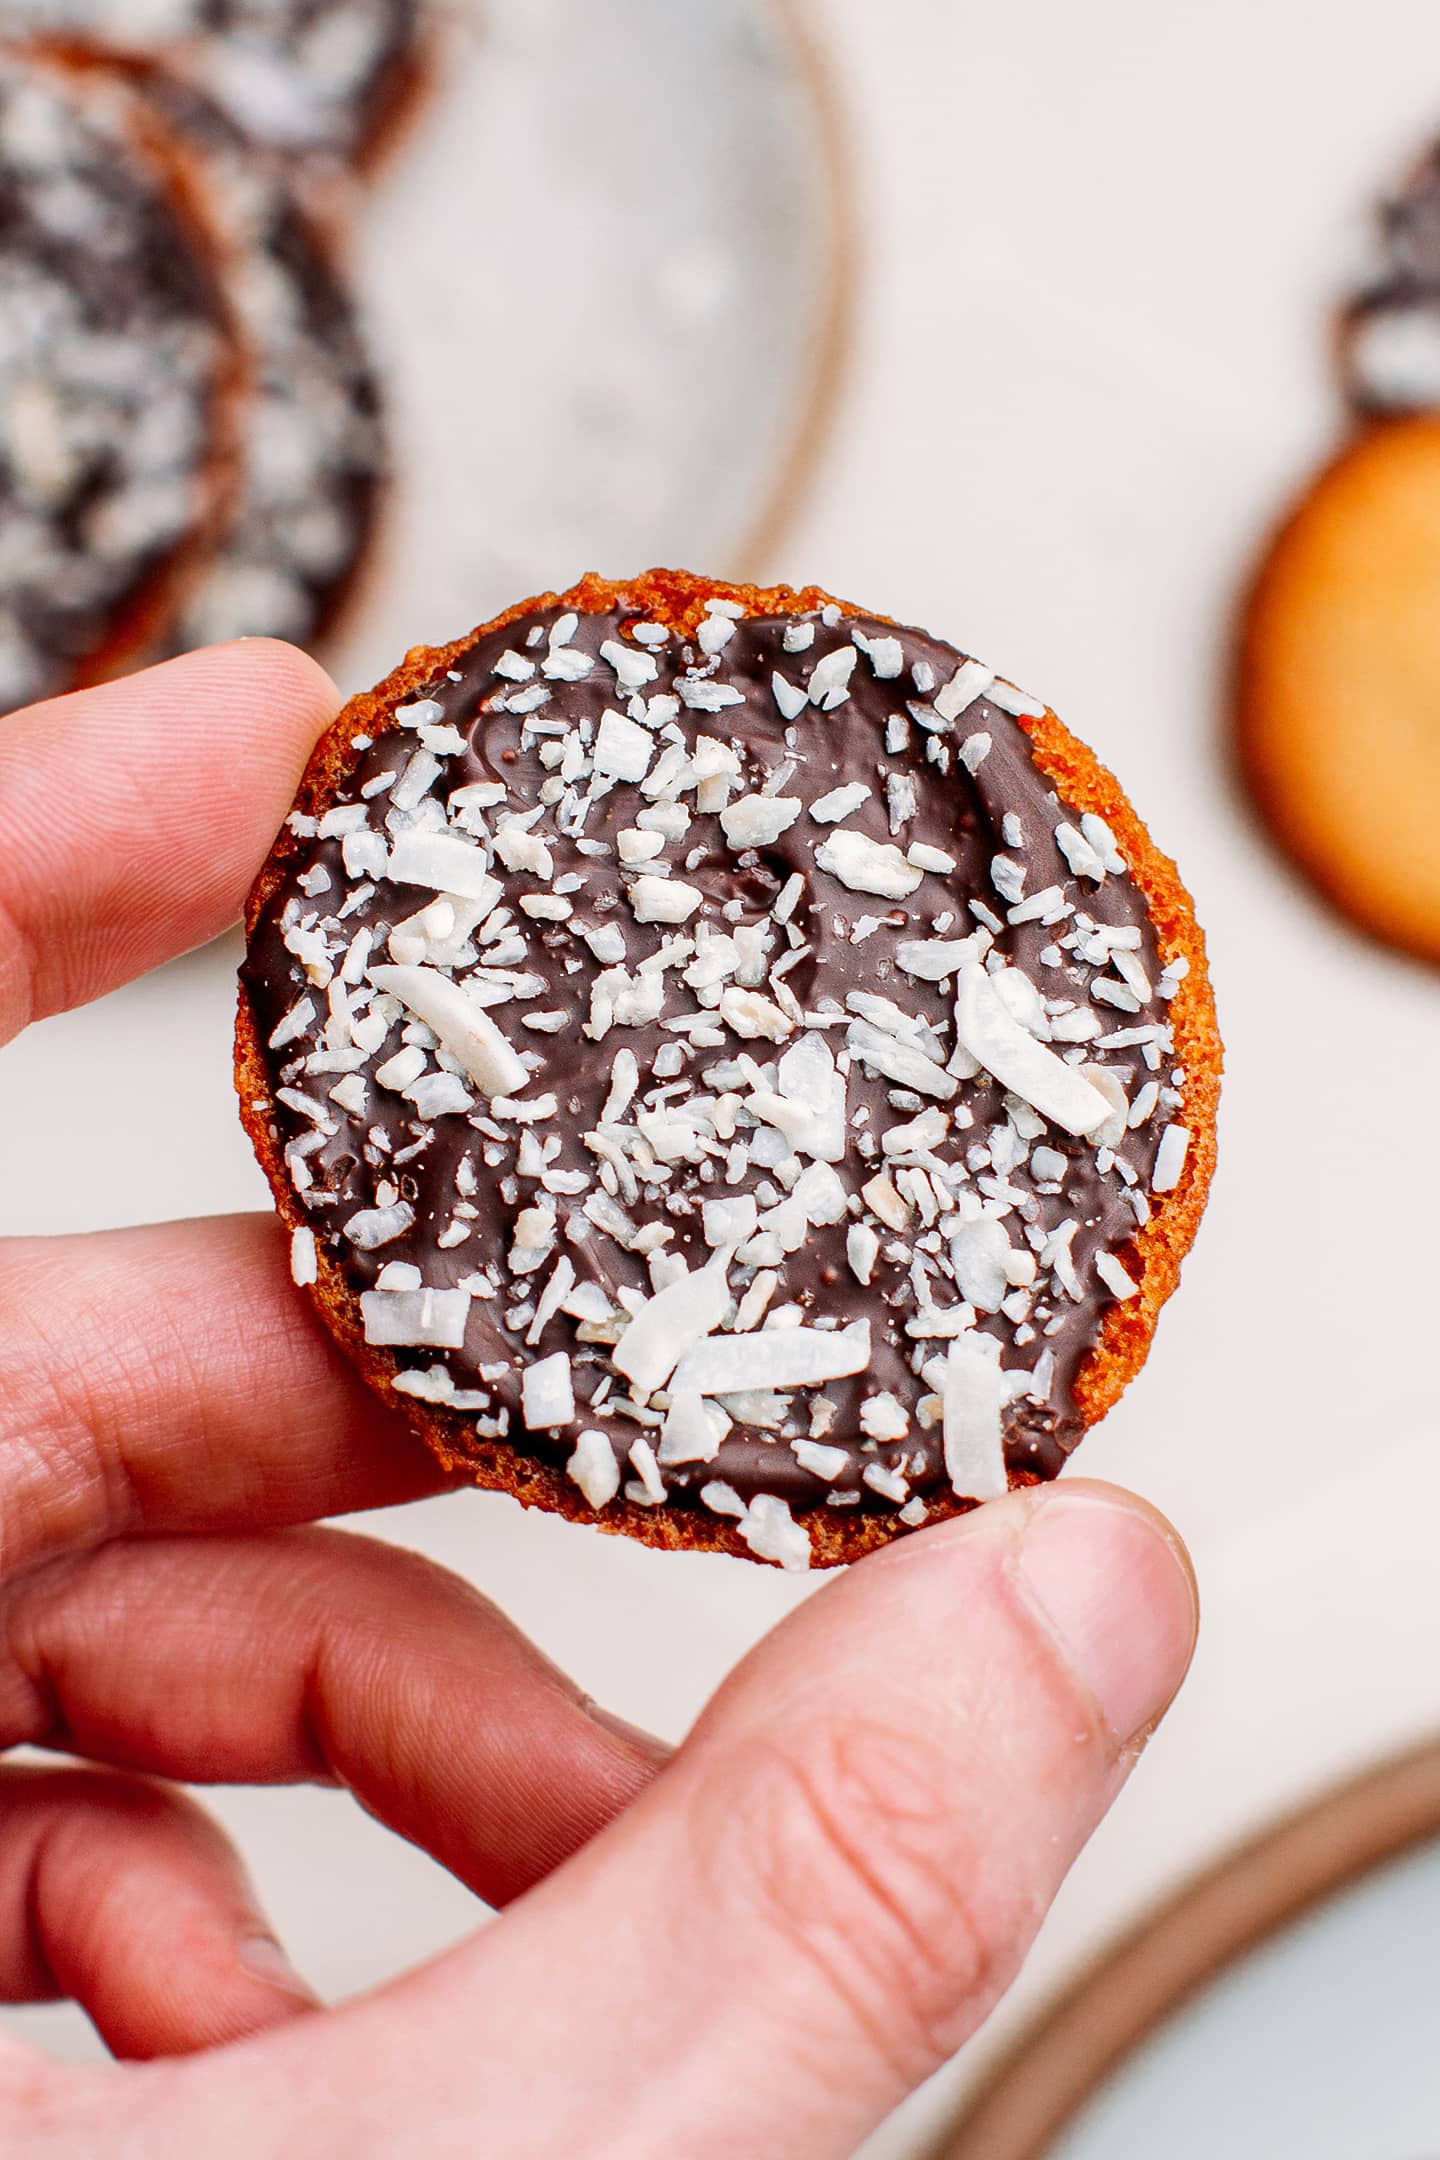 Holding a thin cookie composed of dark chocolate and coconut.